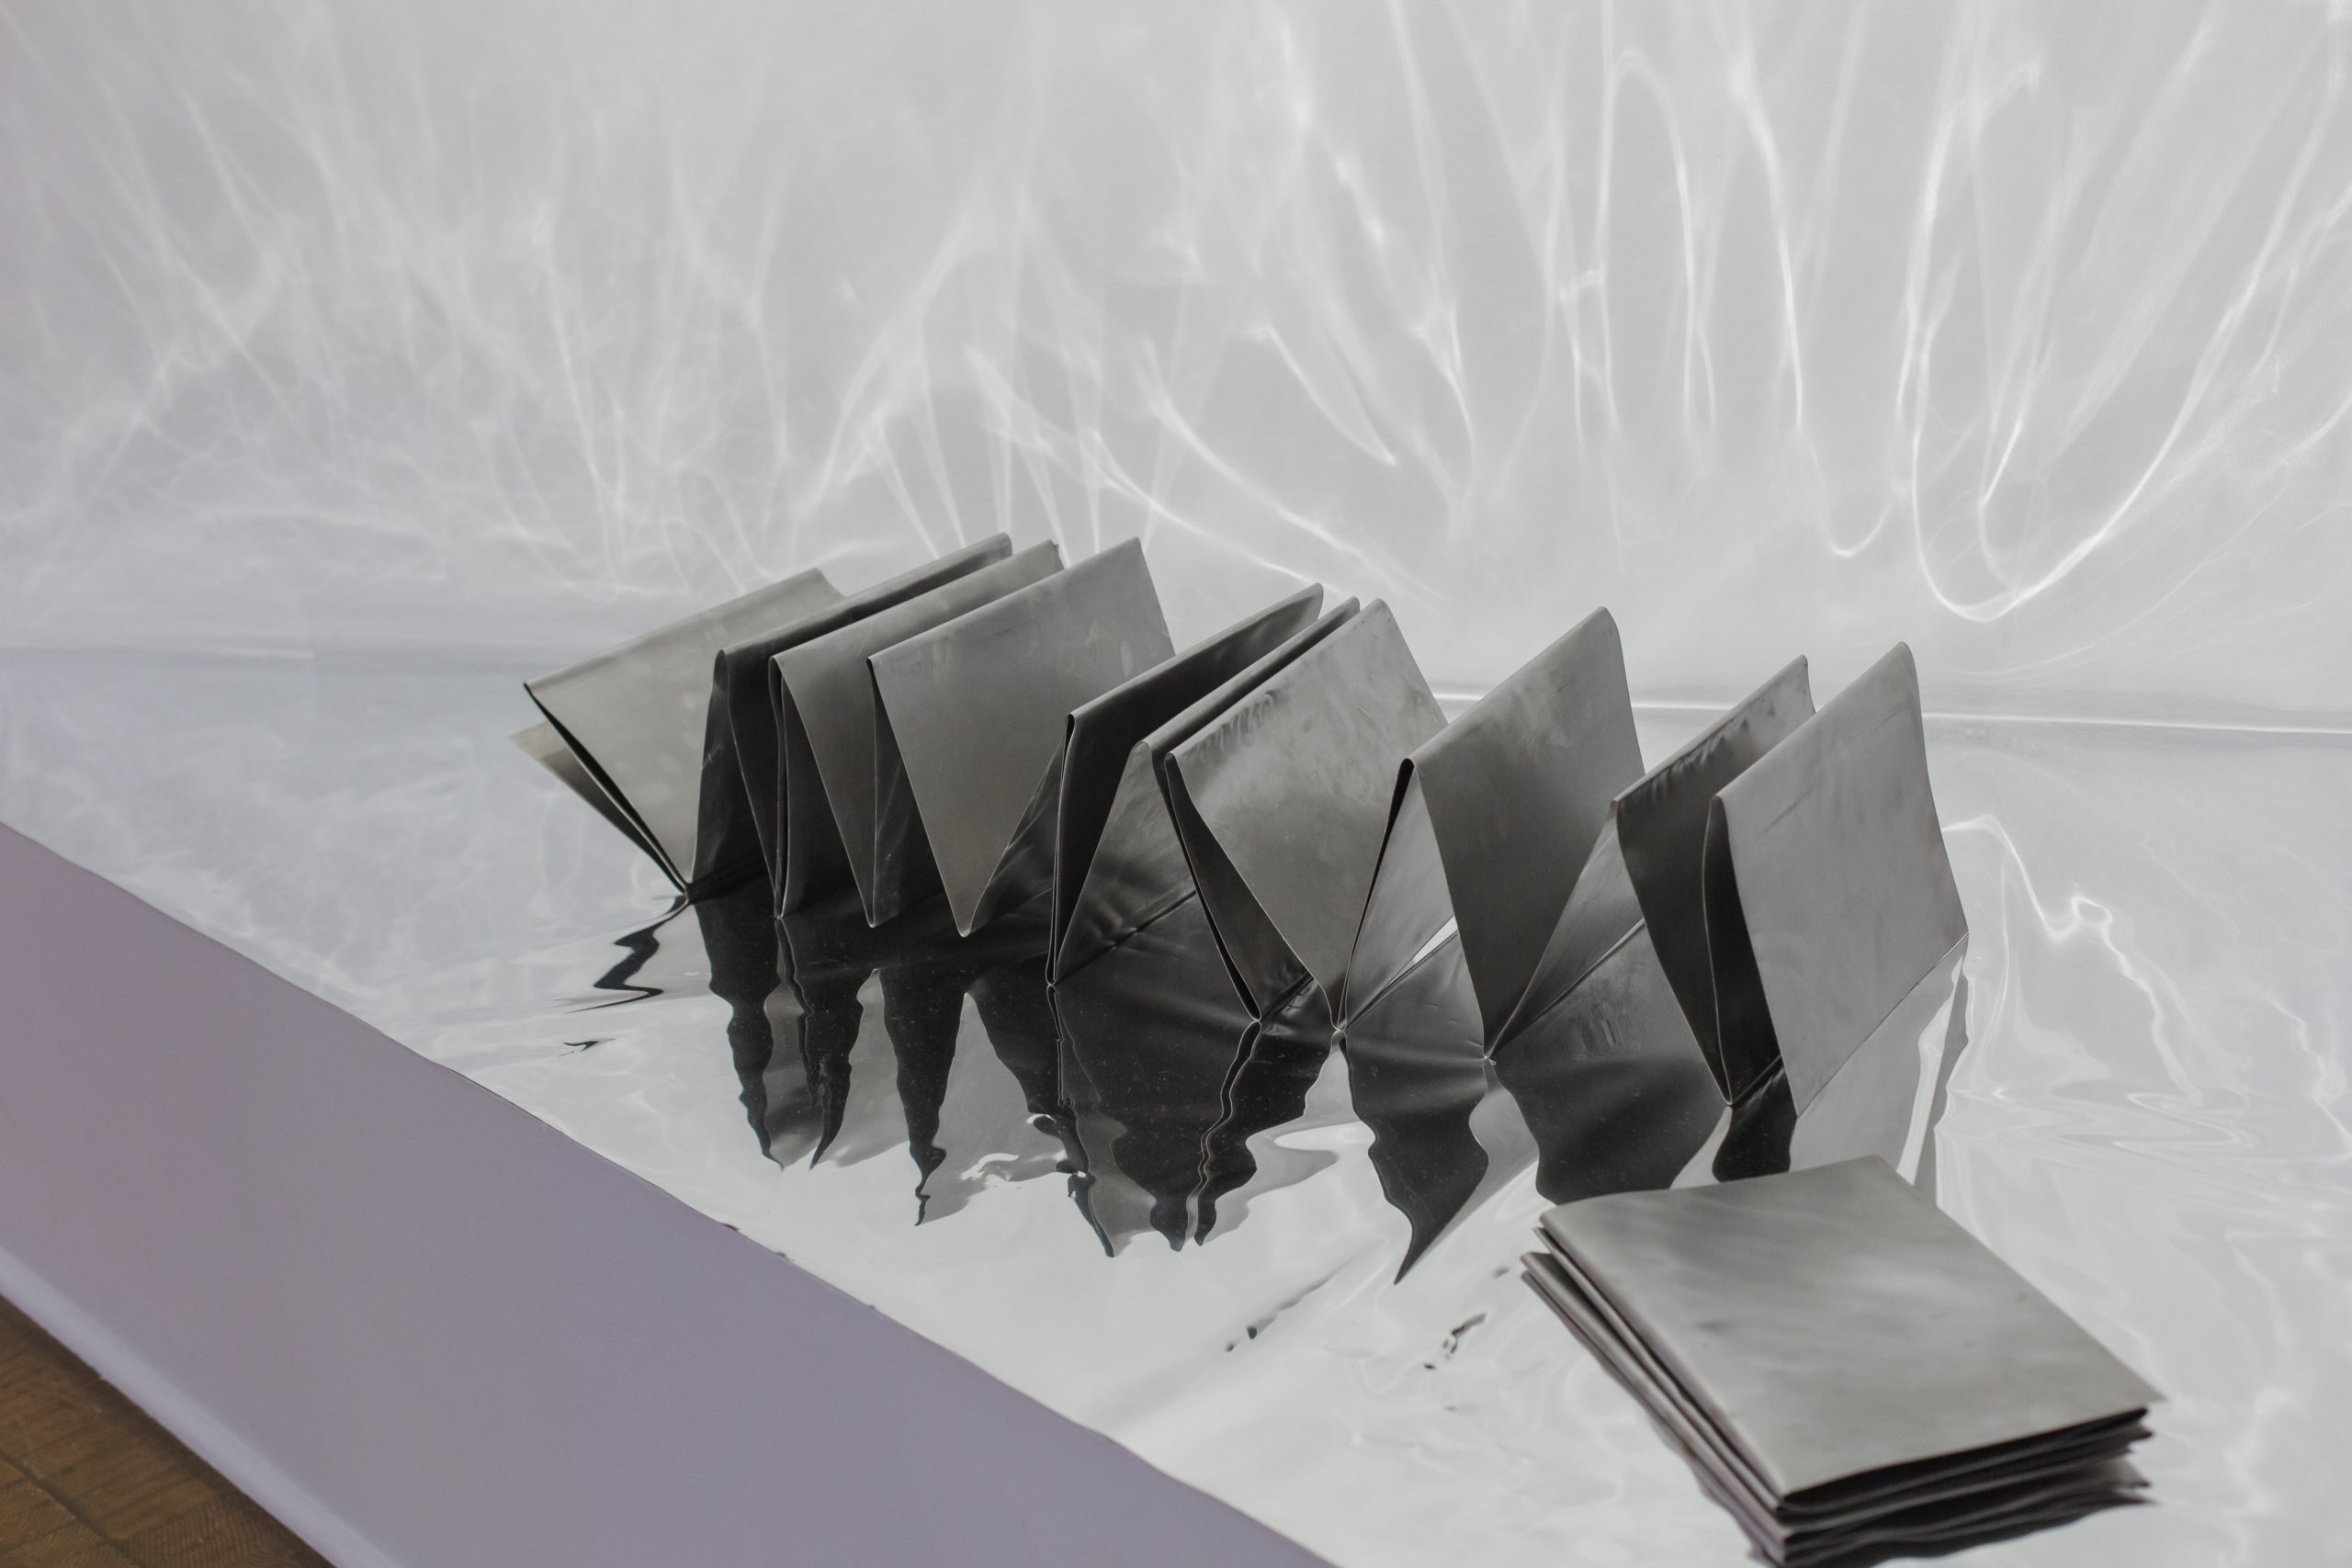 Beatriz Cortez, Codex, 2019. Steel, 8 x 42 x 12 inches and 1.5 x 8.5 x 12 inches, Courtesy of the artist and Commonwealth and Council, Los Angeles.